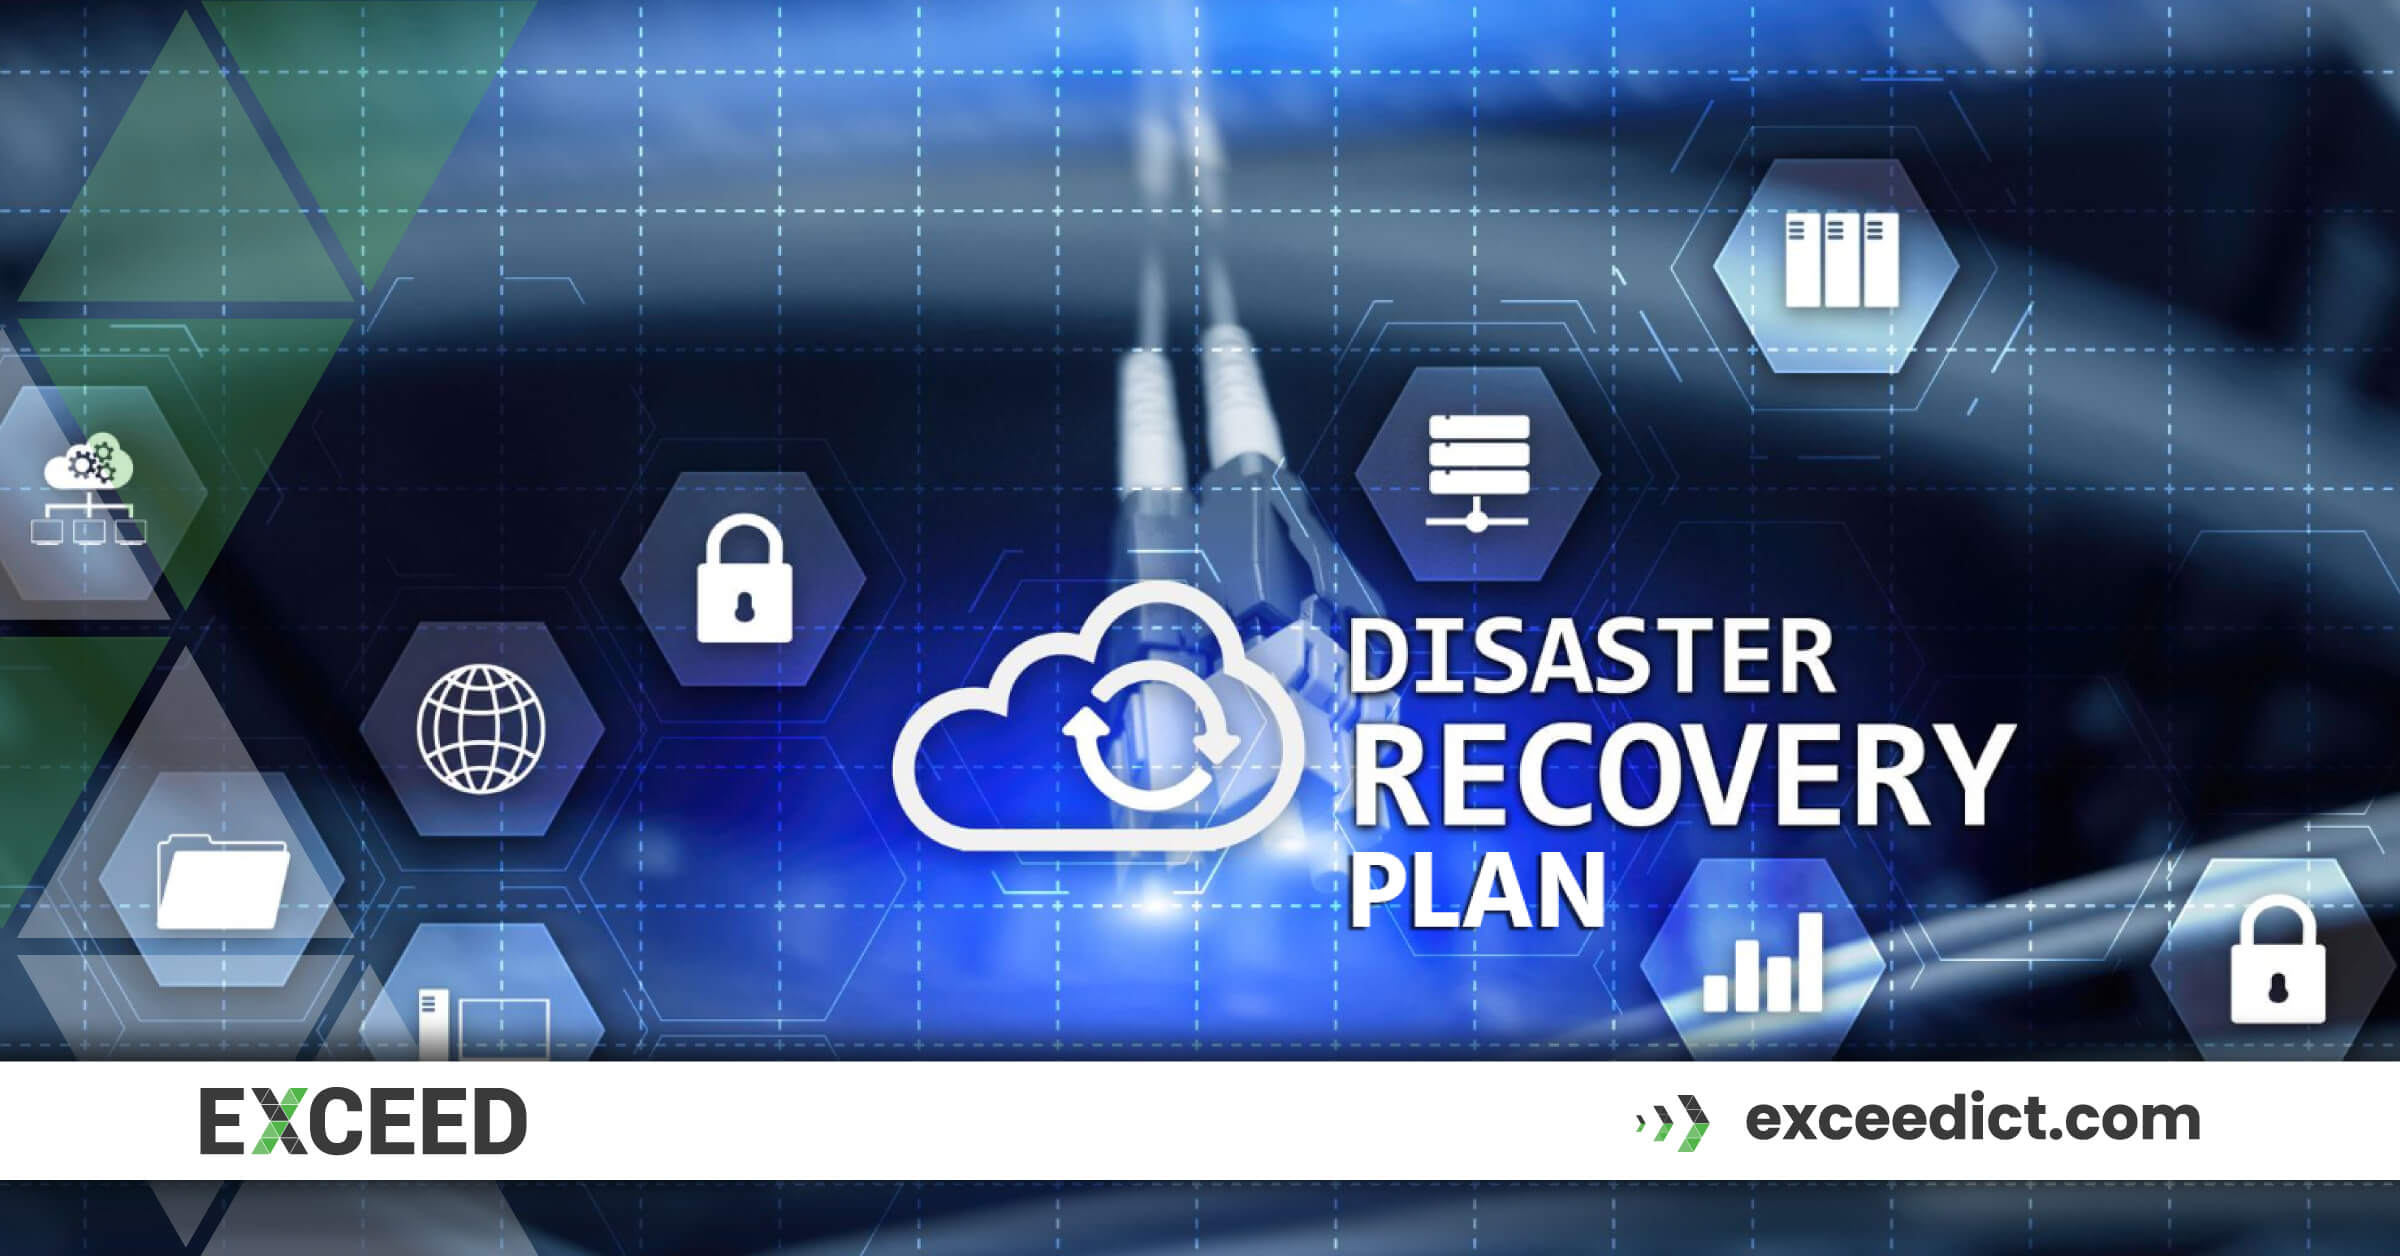 IT Disaster Recovery Planning Process for Ensuring Business Continuity